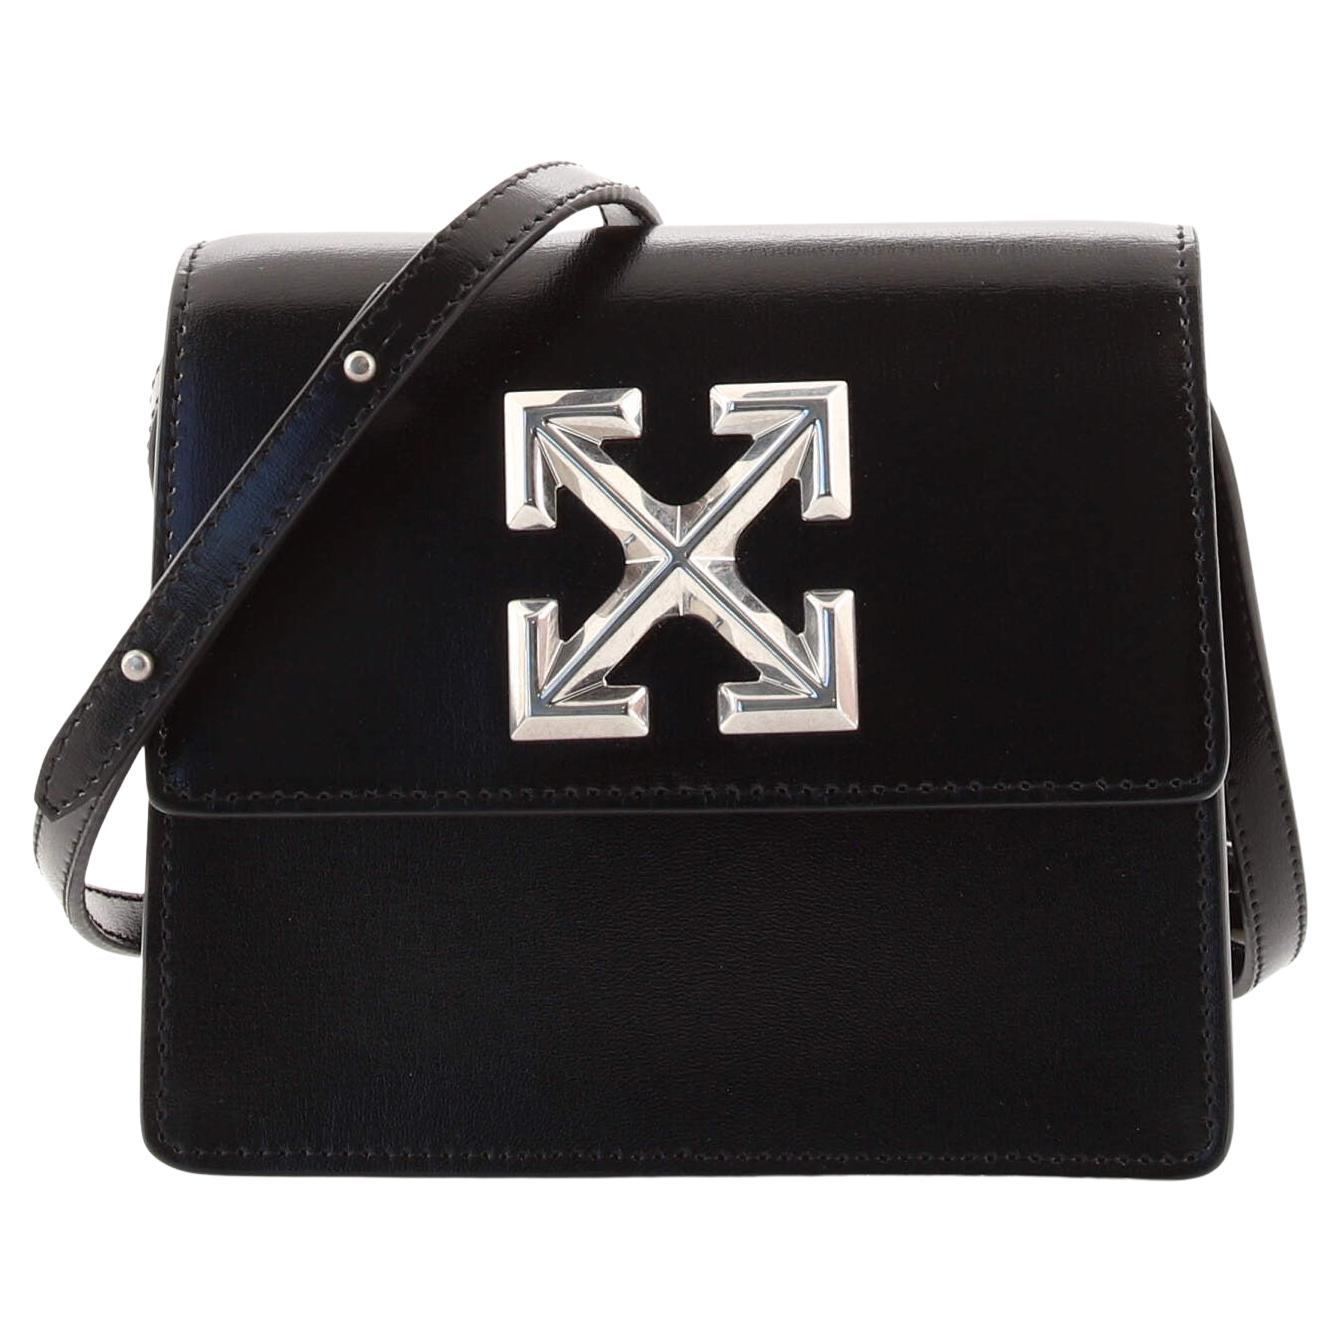 OFF-WHITE: 1.4 Jitney leather bag - Blue  Off-White crossbody bags  OWNP037S23LEA003 online at